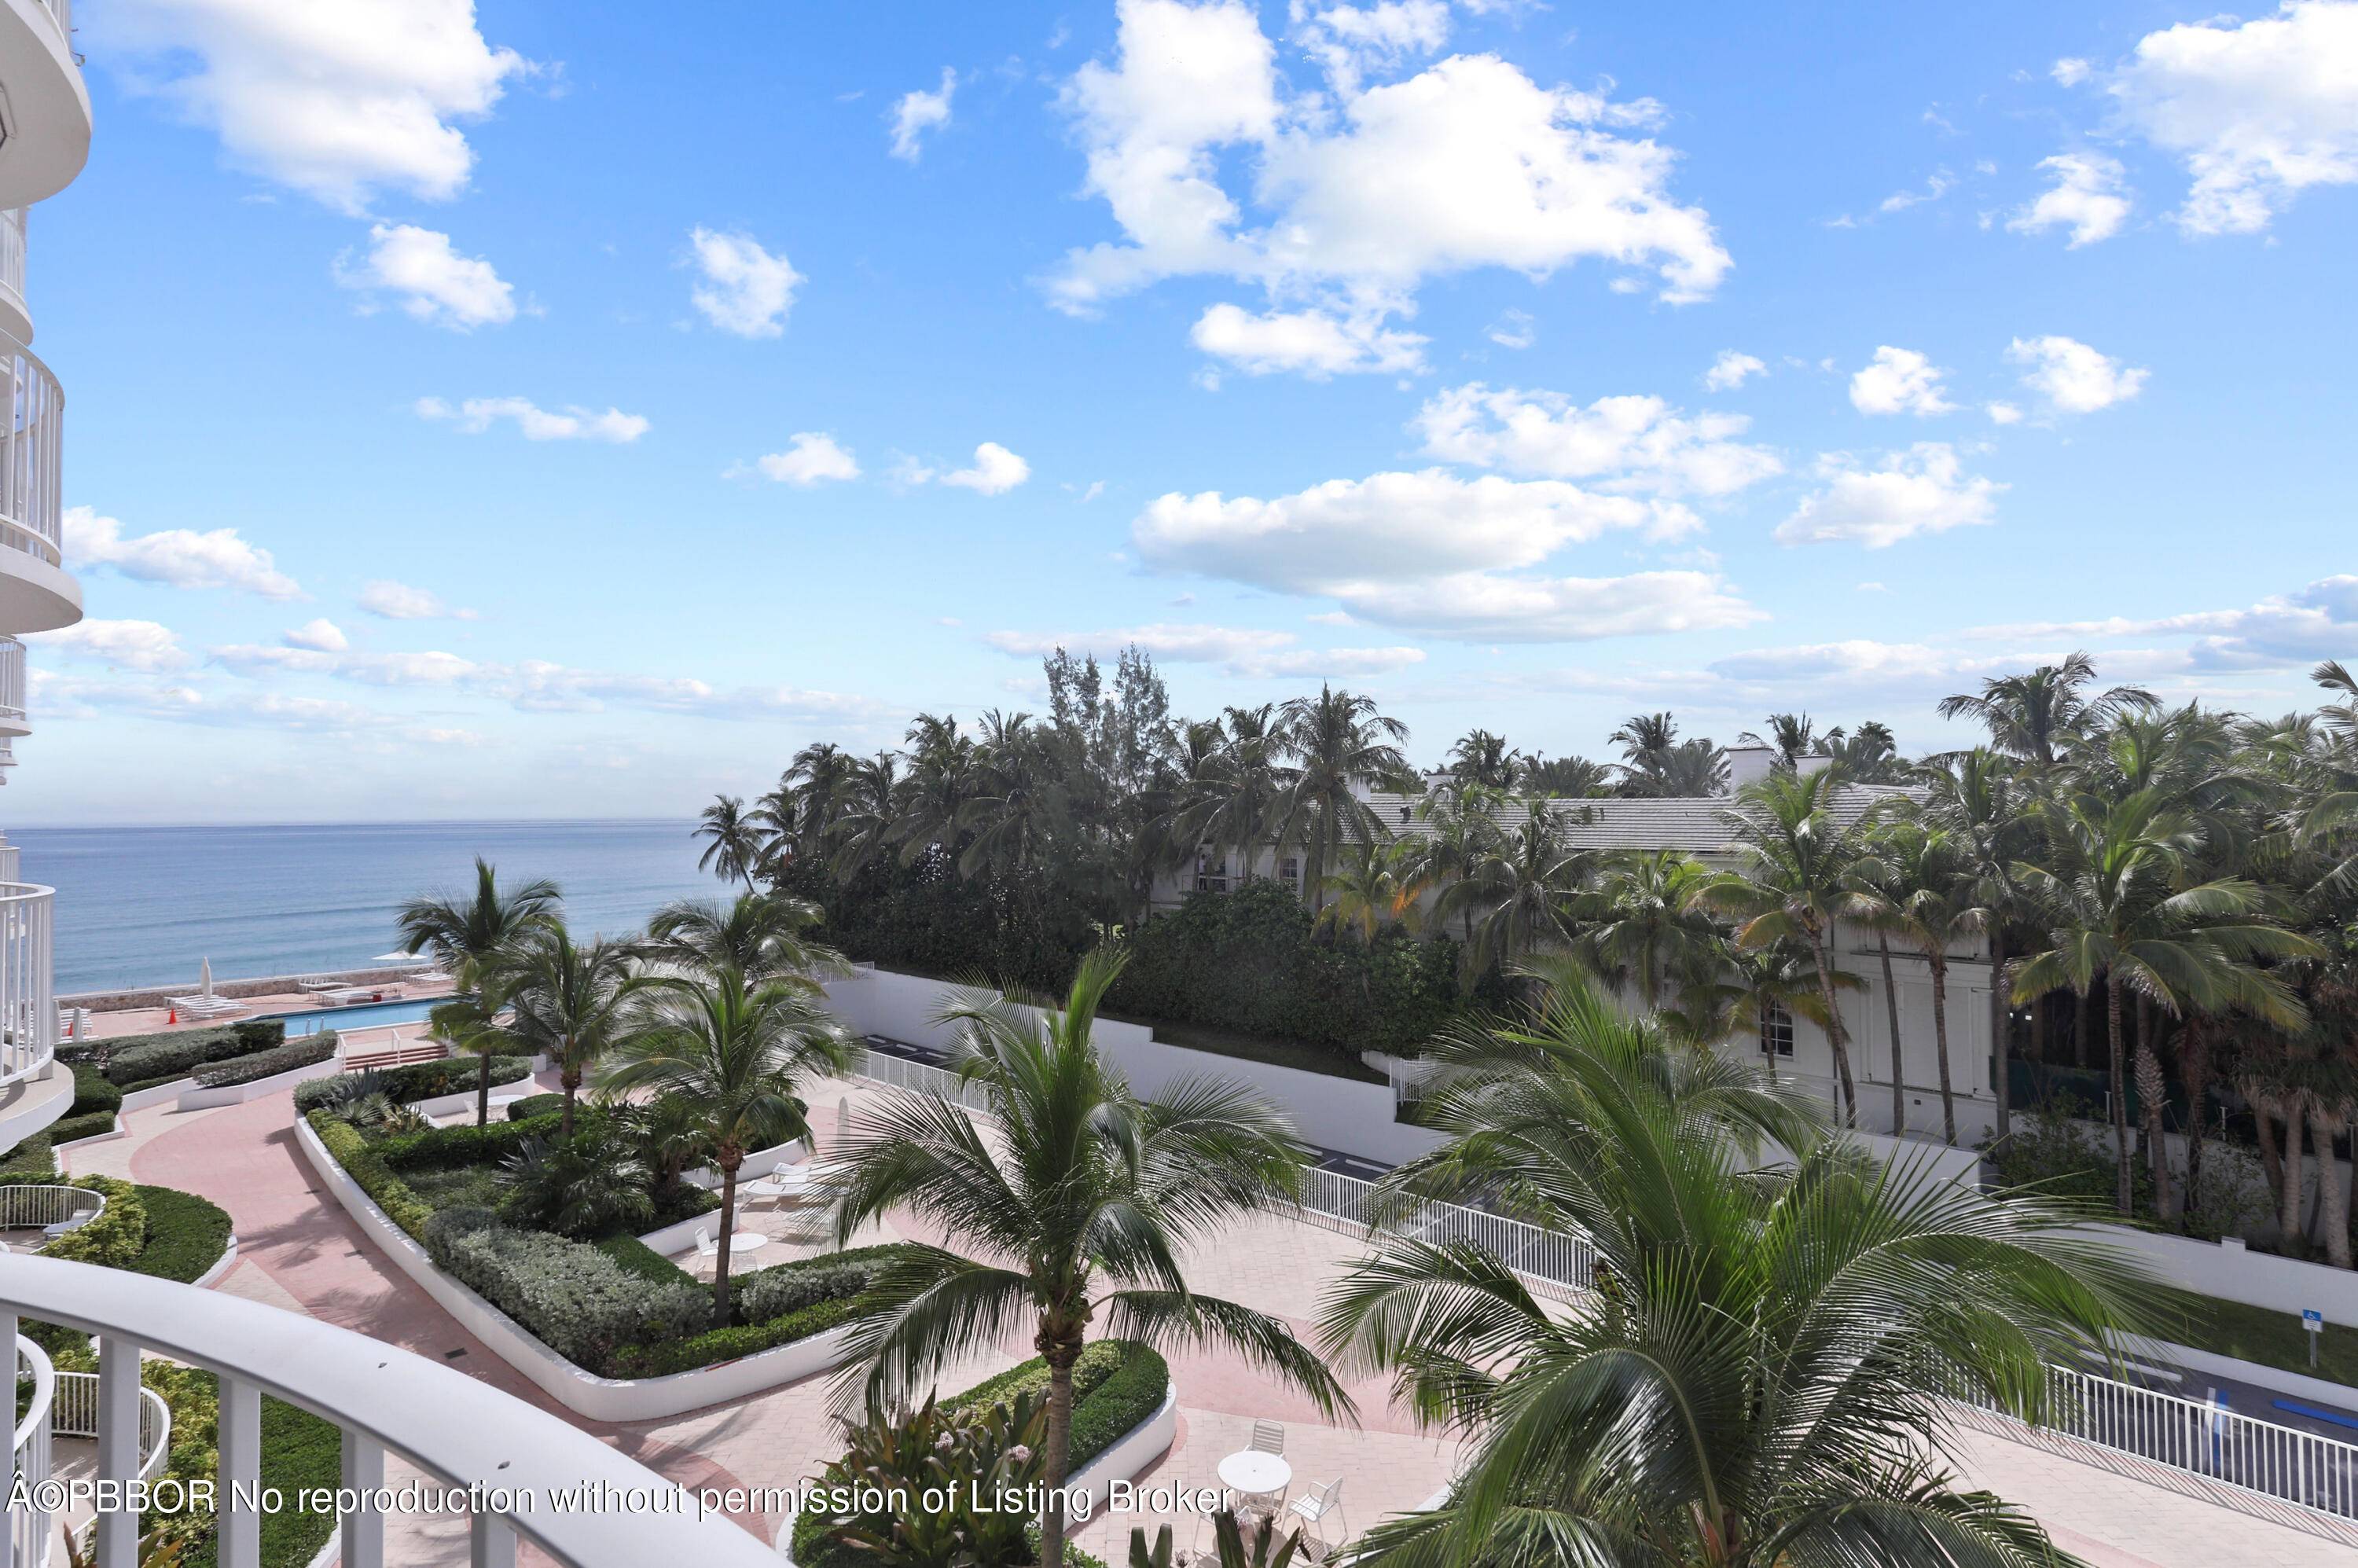 Gorgeous One bedroom, Pied a Terre warm, cozy and beautifully decorated with plantation shutters and amazing views of the ocean, pool and tropical gardens.